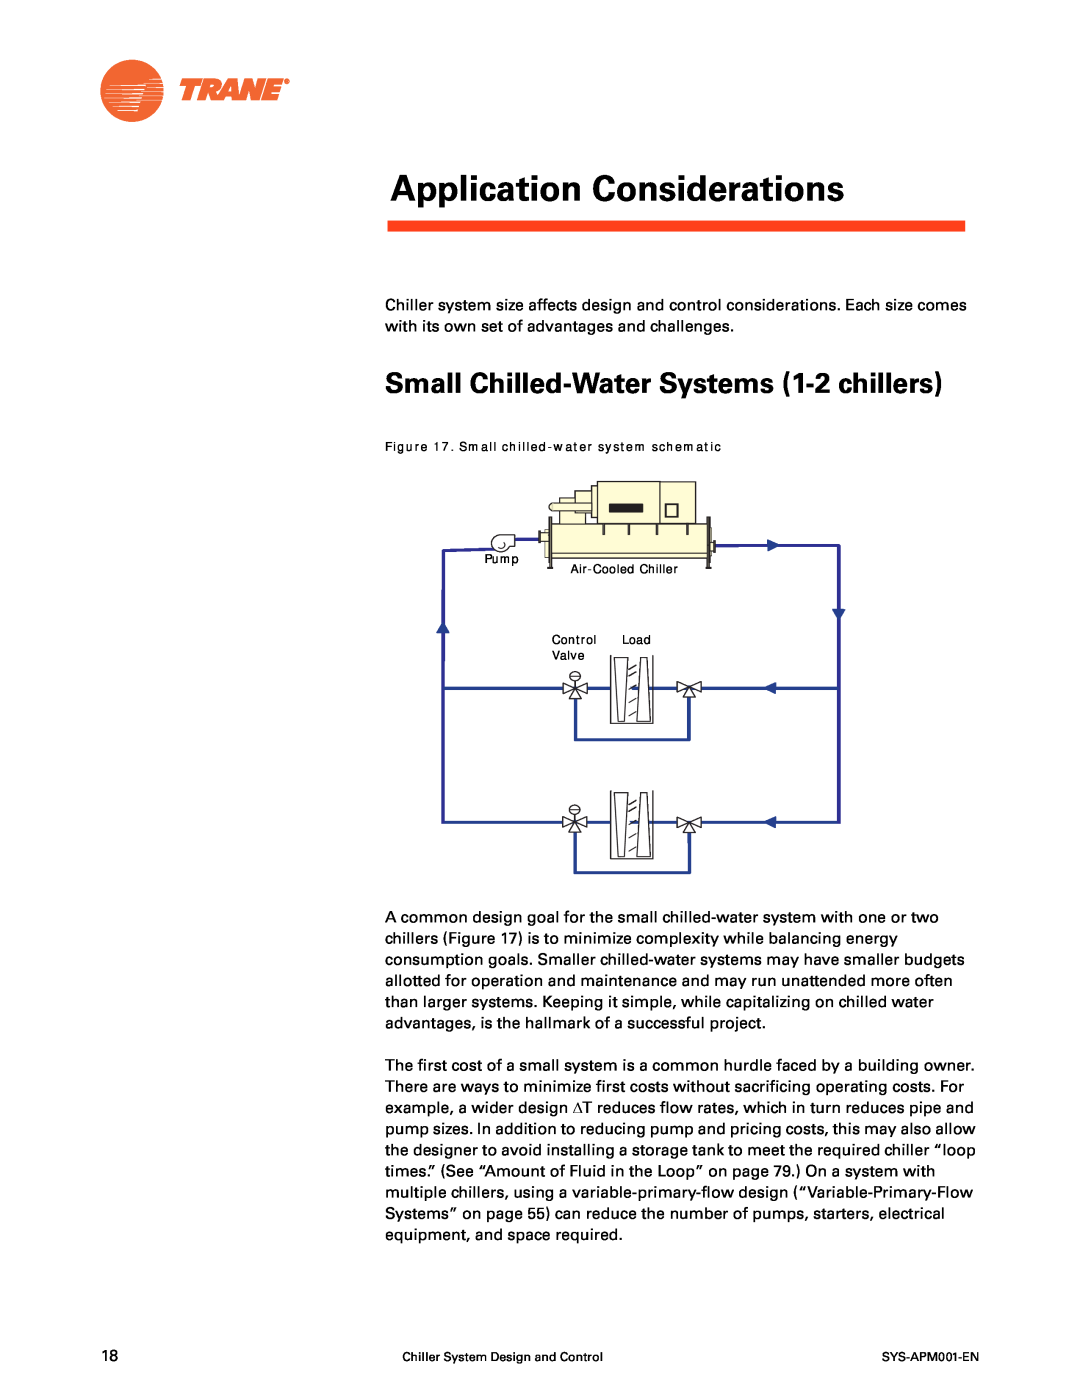 Trane SYS-APM001-EN manual Application Considerations, Small Chilled-Water Systems 1-2 chillers 